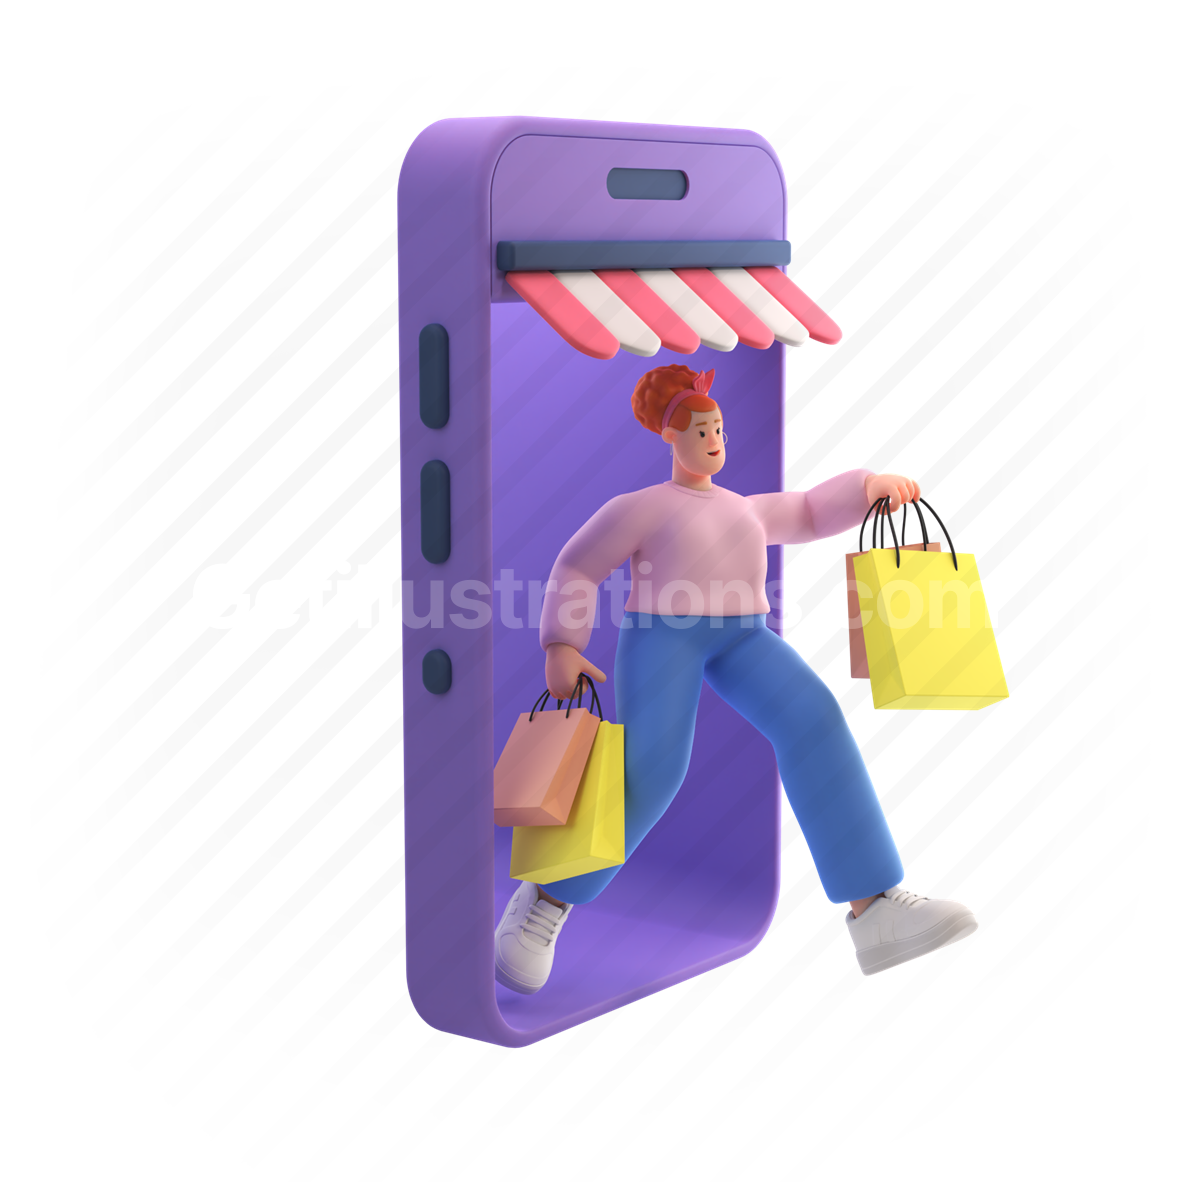 smartphone, phone, shopping, shop, store, woman, female, checkout